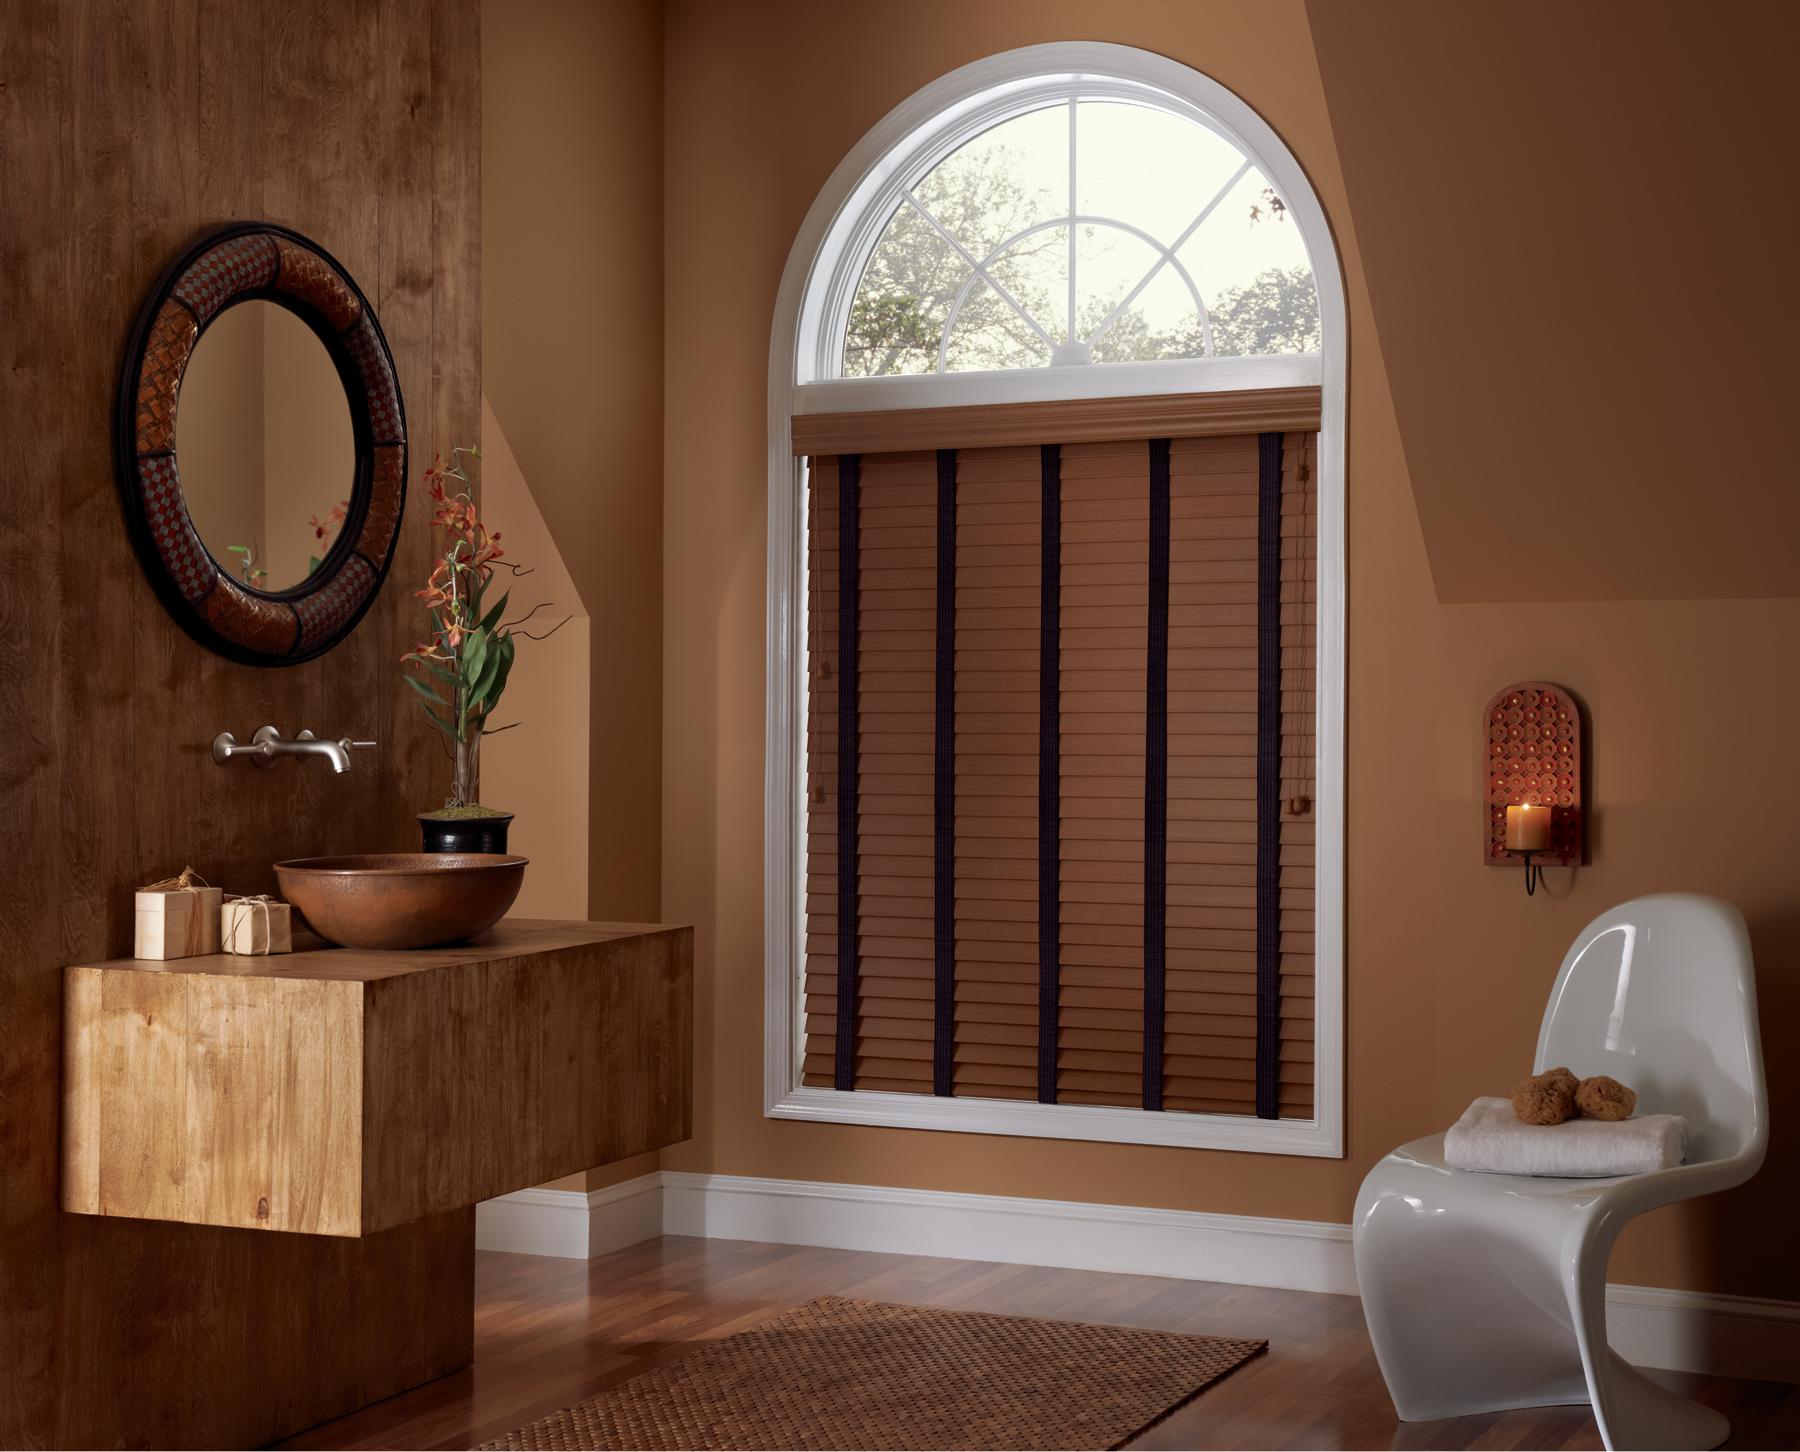 Wood Blinds, Budget Blinds of Vernon Budget Blinds of Vernon Vernon (250)275-2735